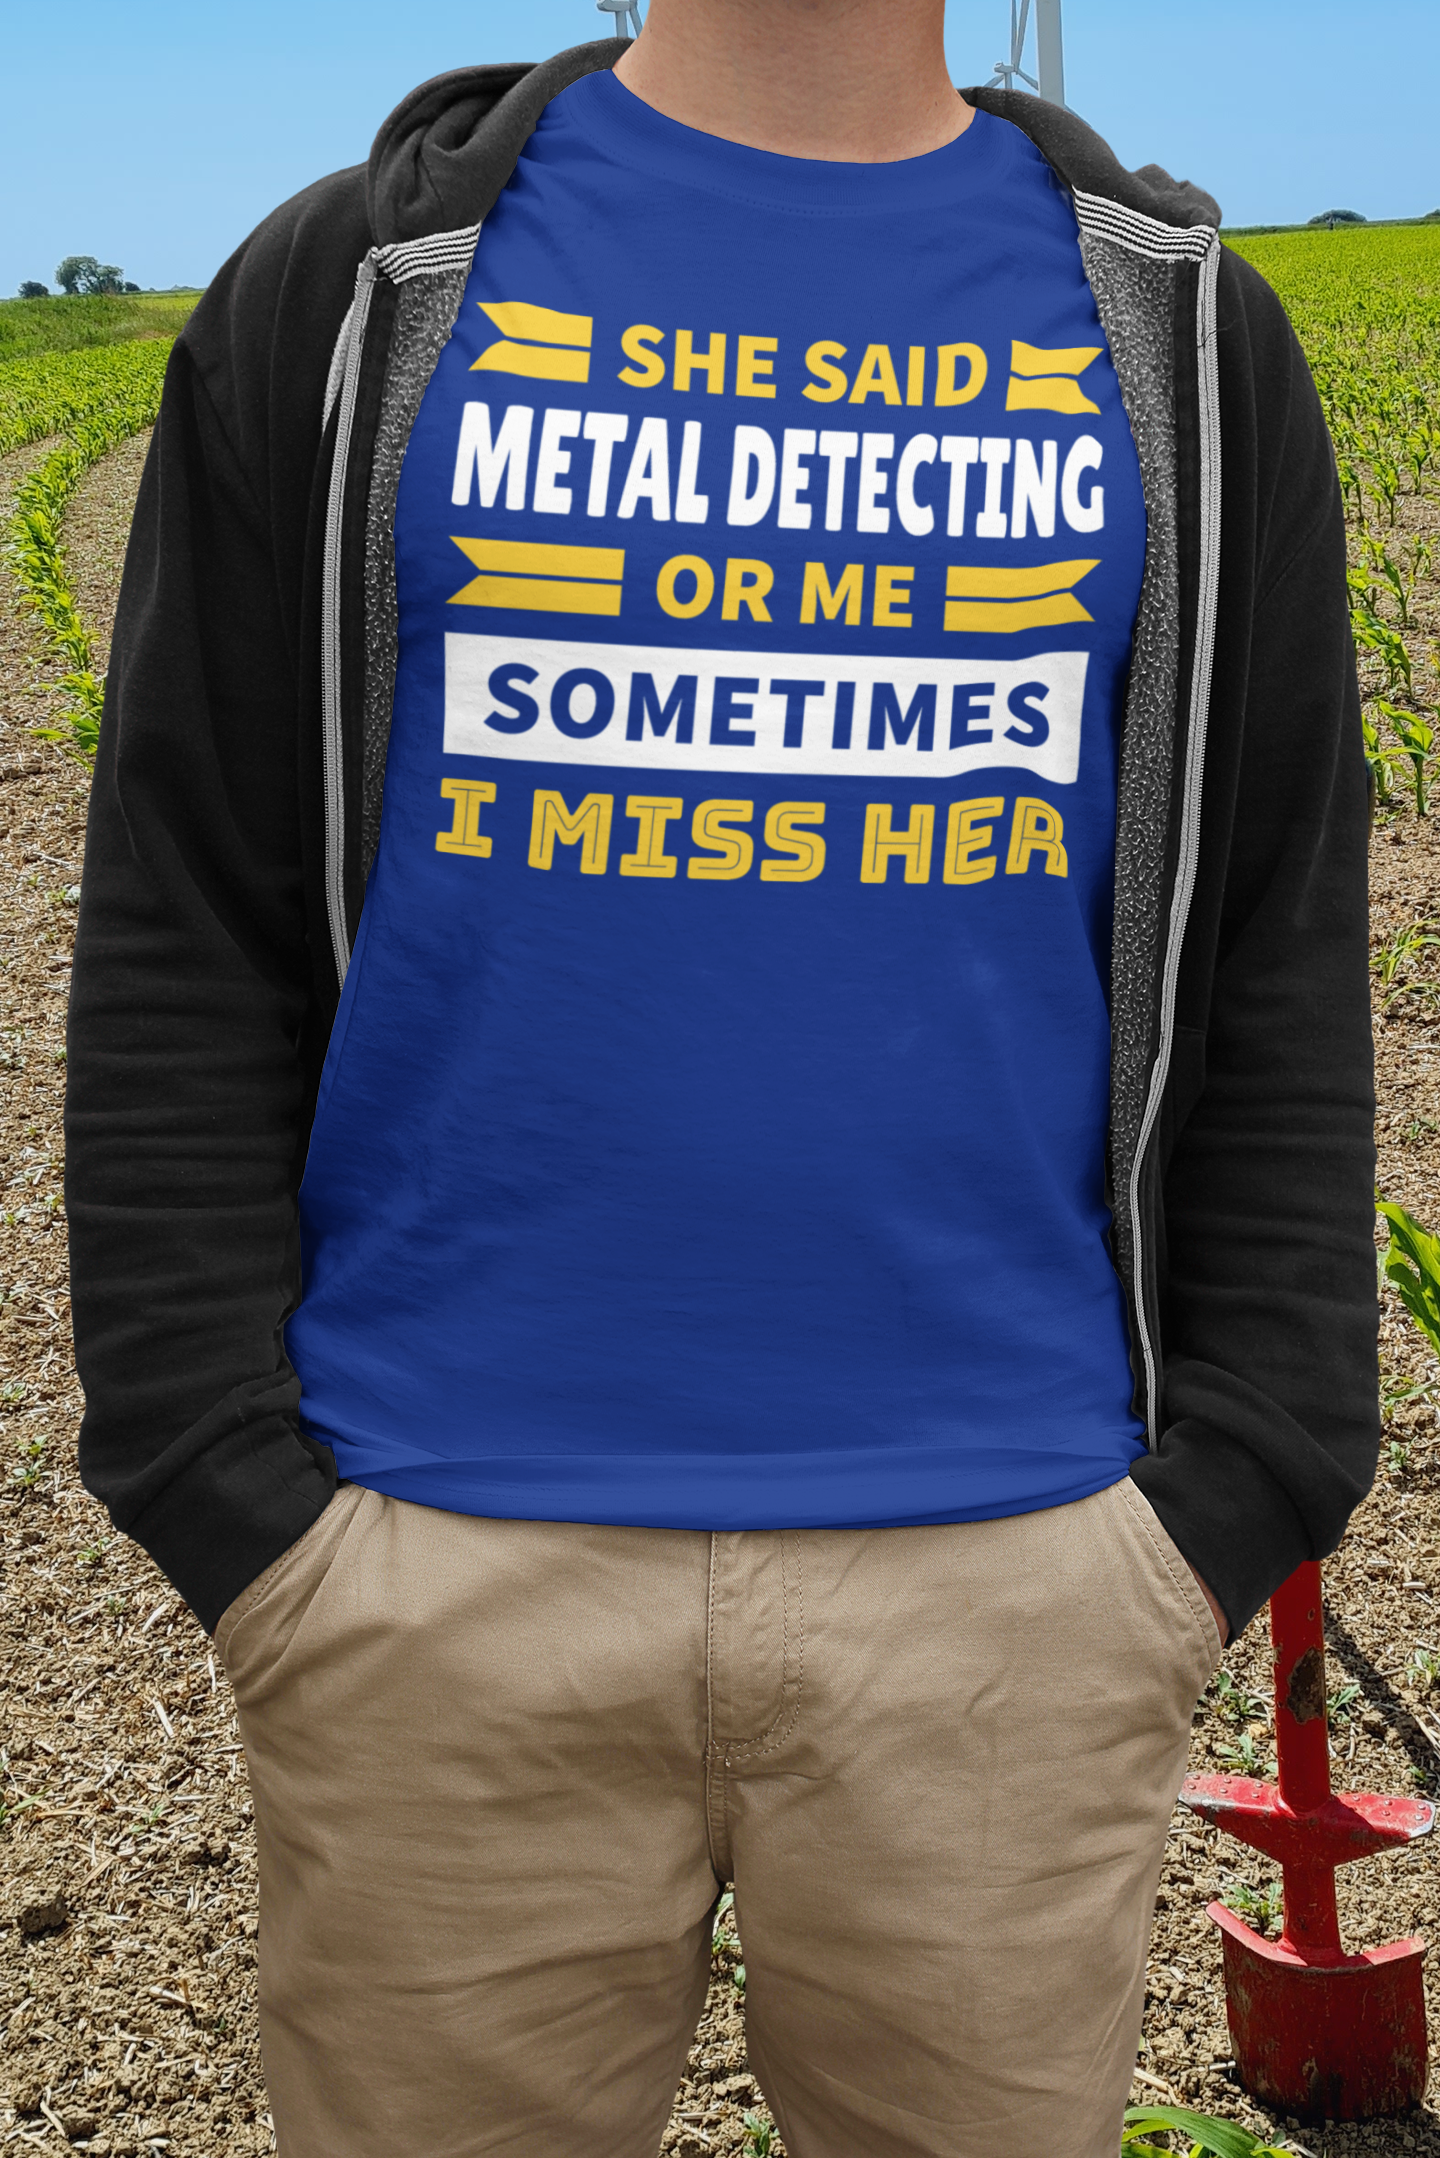 She said metal detecting or me sometimes I miss her